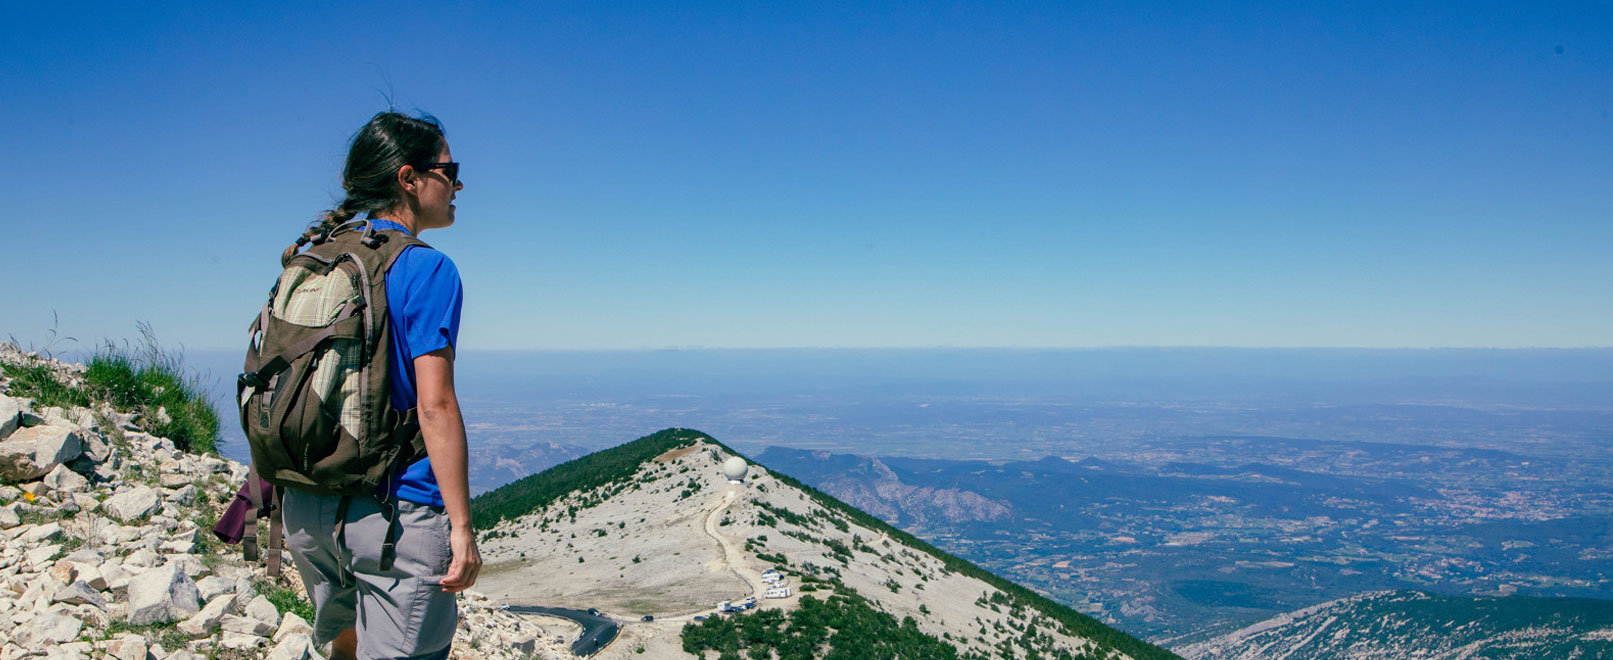 Discover the GR® de Pays hiking trails around the Ventoux Mountains!